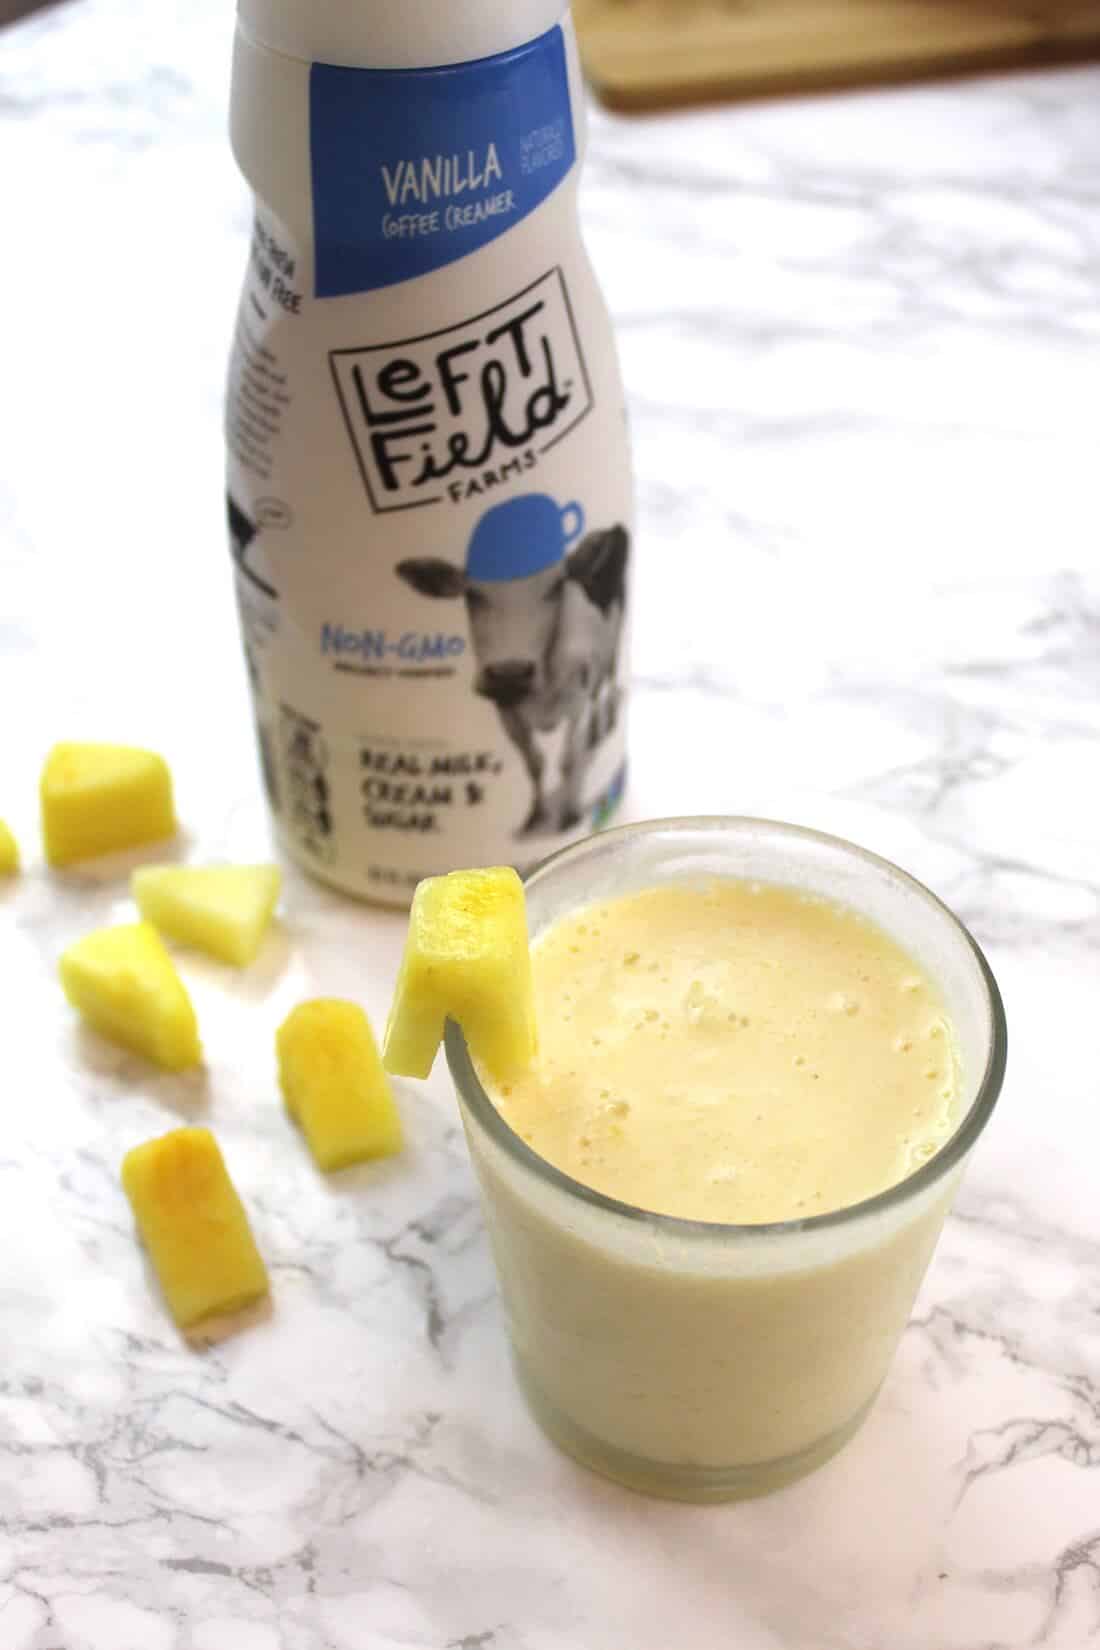 Pineapple smoothie in glass next to bottle of Left Field milk.